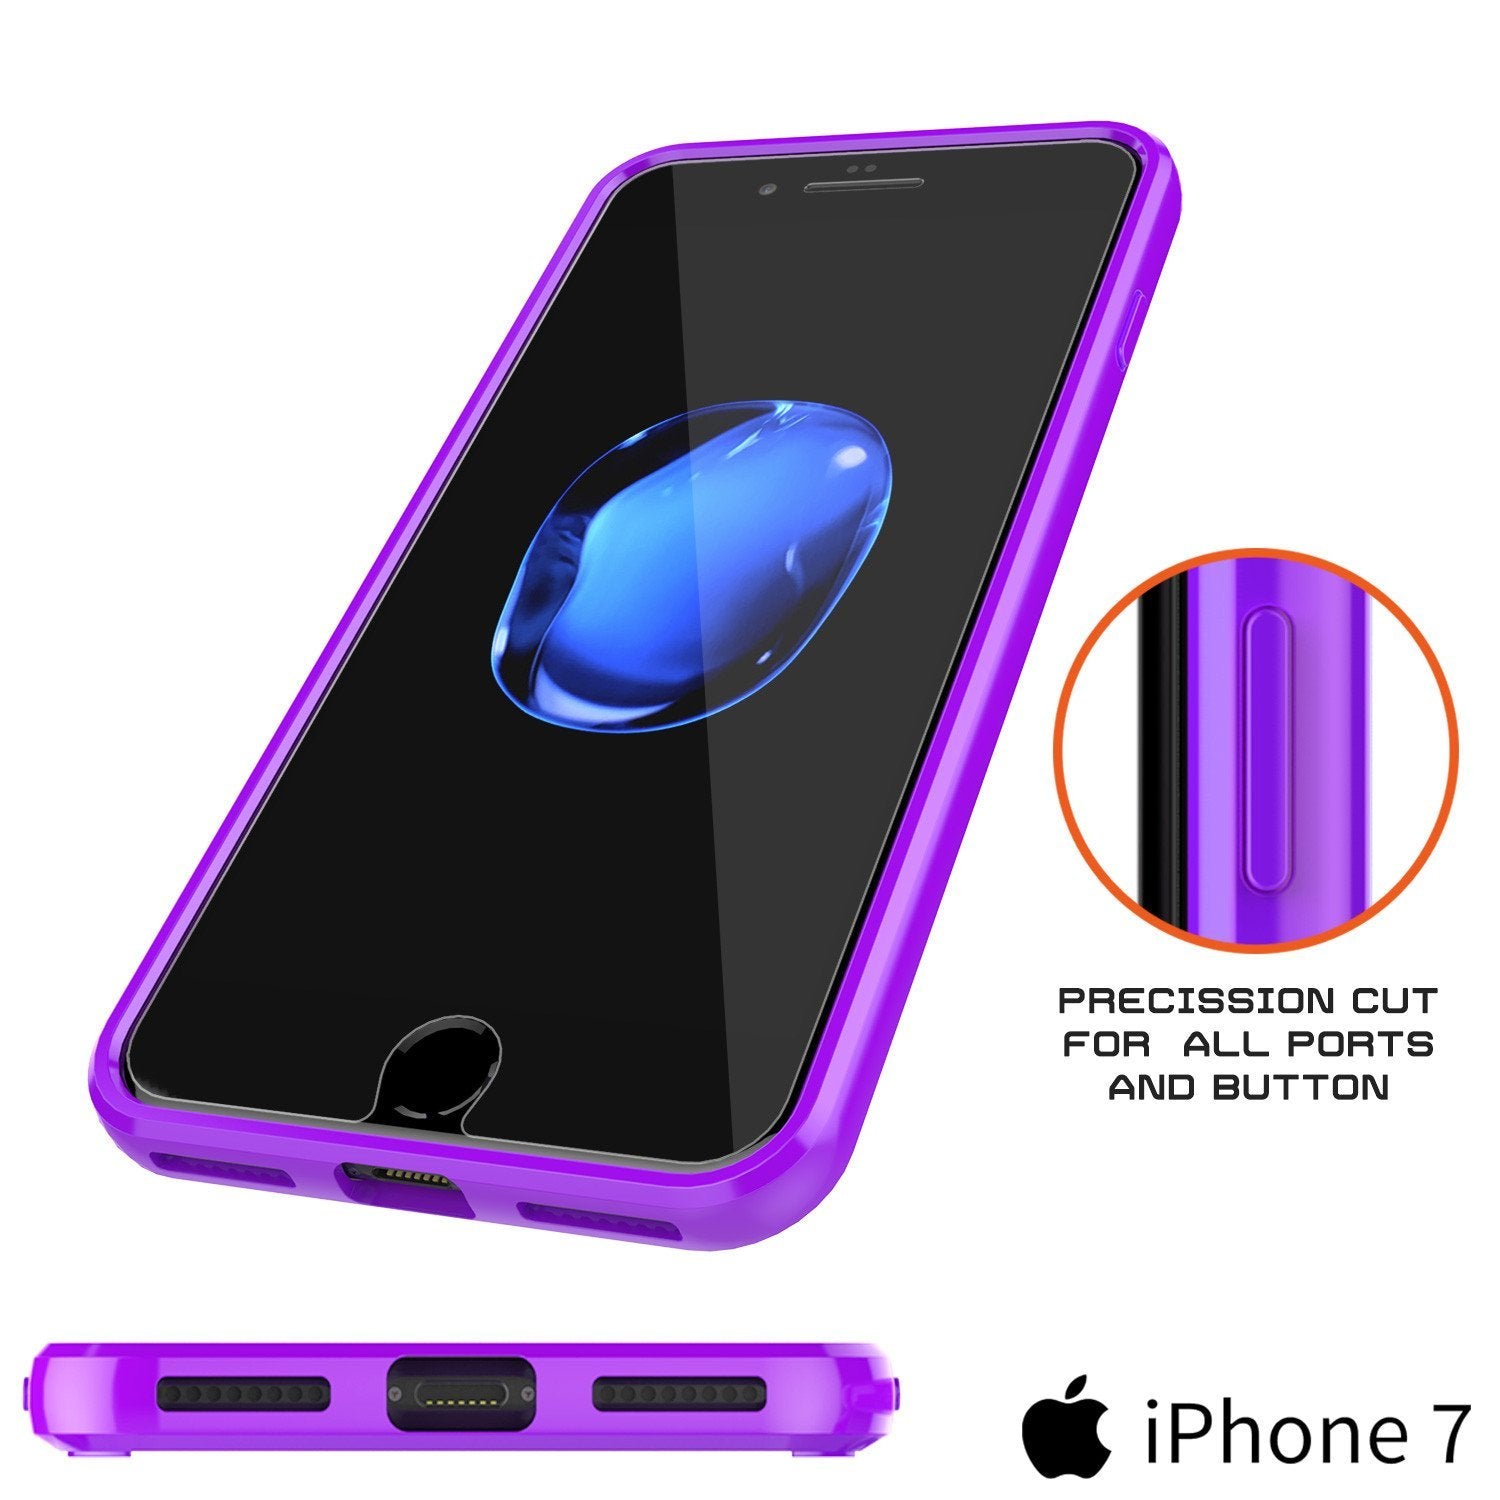 iPhone 8 Case Punkcase® LUCID 2.0 Purple Series w/ PUNK SHIELD Screen Protector | Ultra Fit - PunkCase NZ